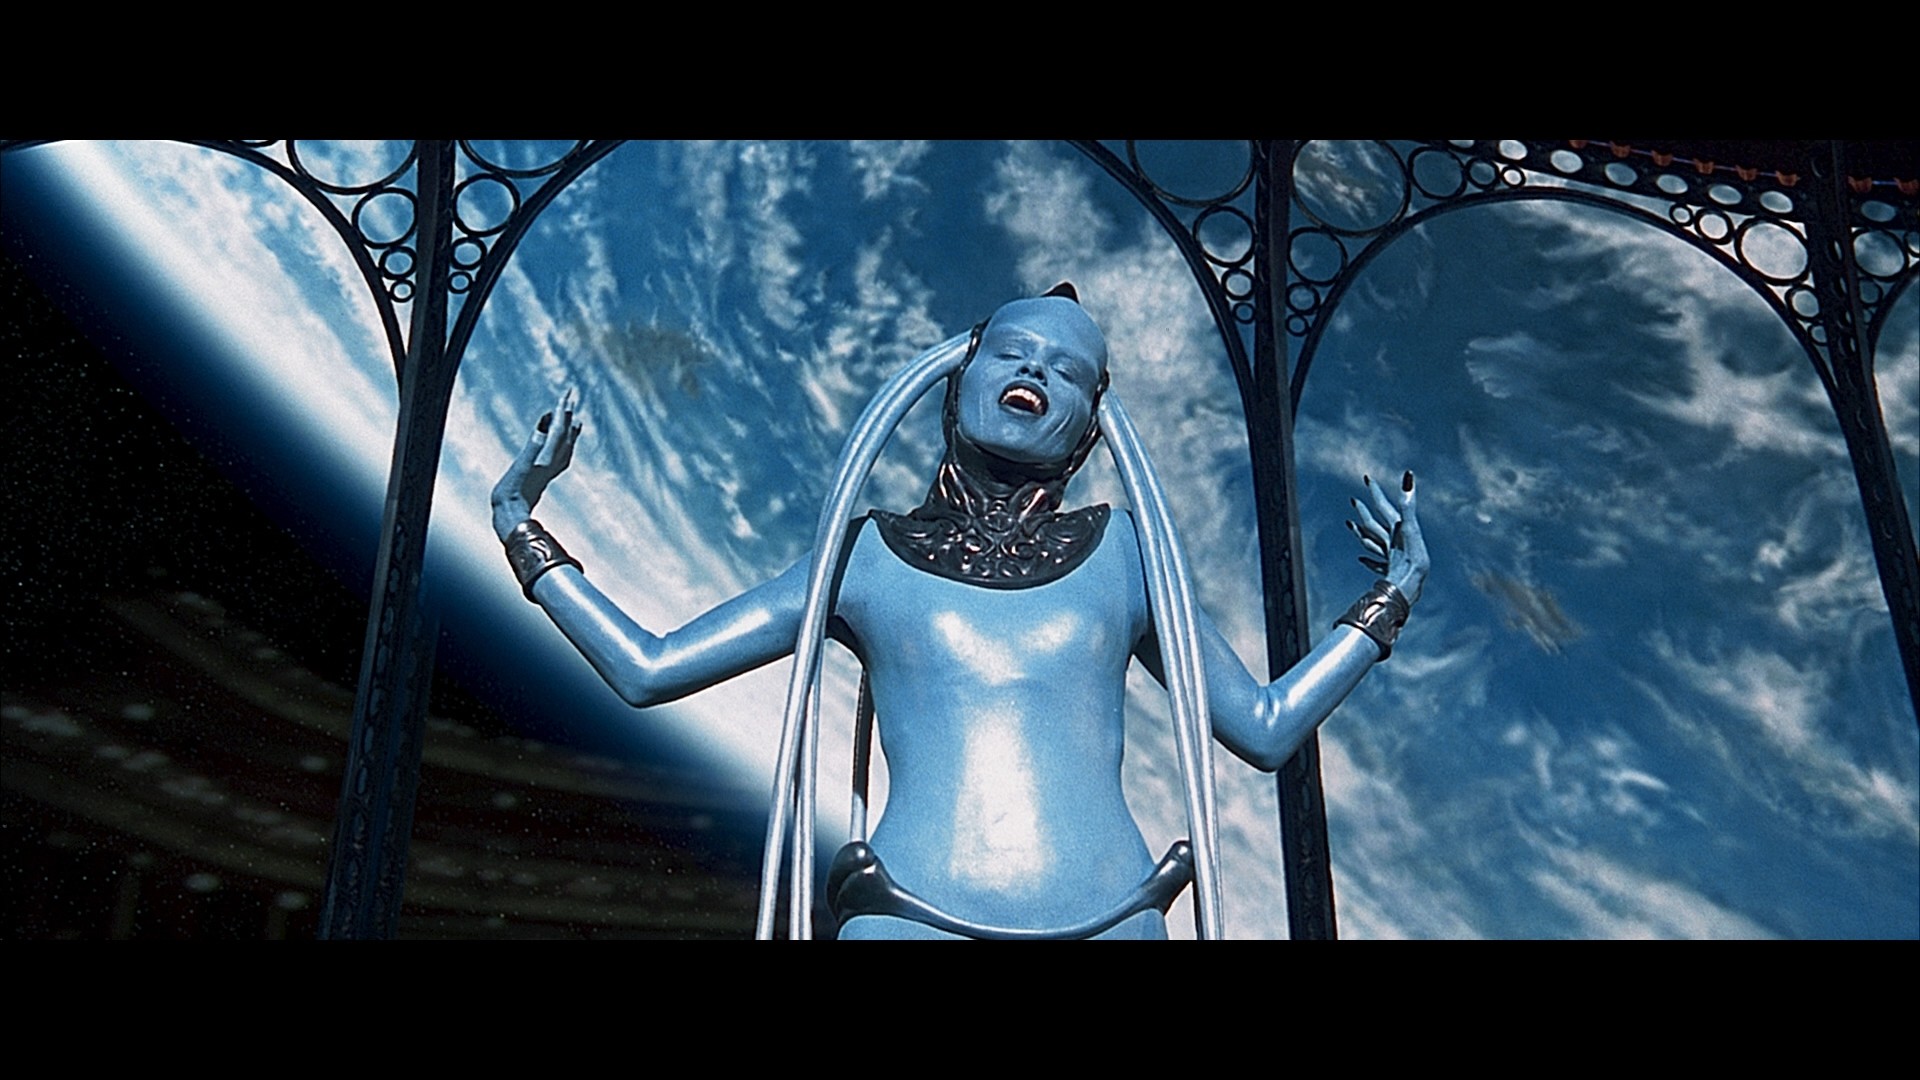 1920x1080 The Fifth Element HD Wallpaper | Background Image |  | ID:200939 -  Wallpaper Abyss